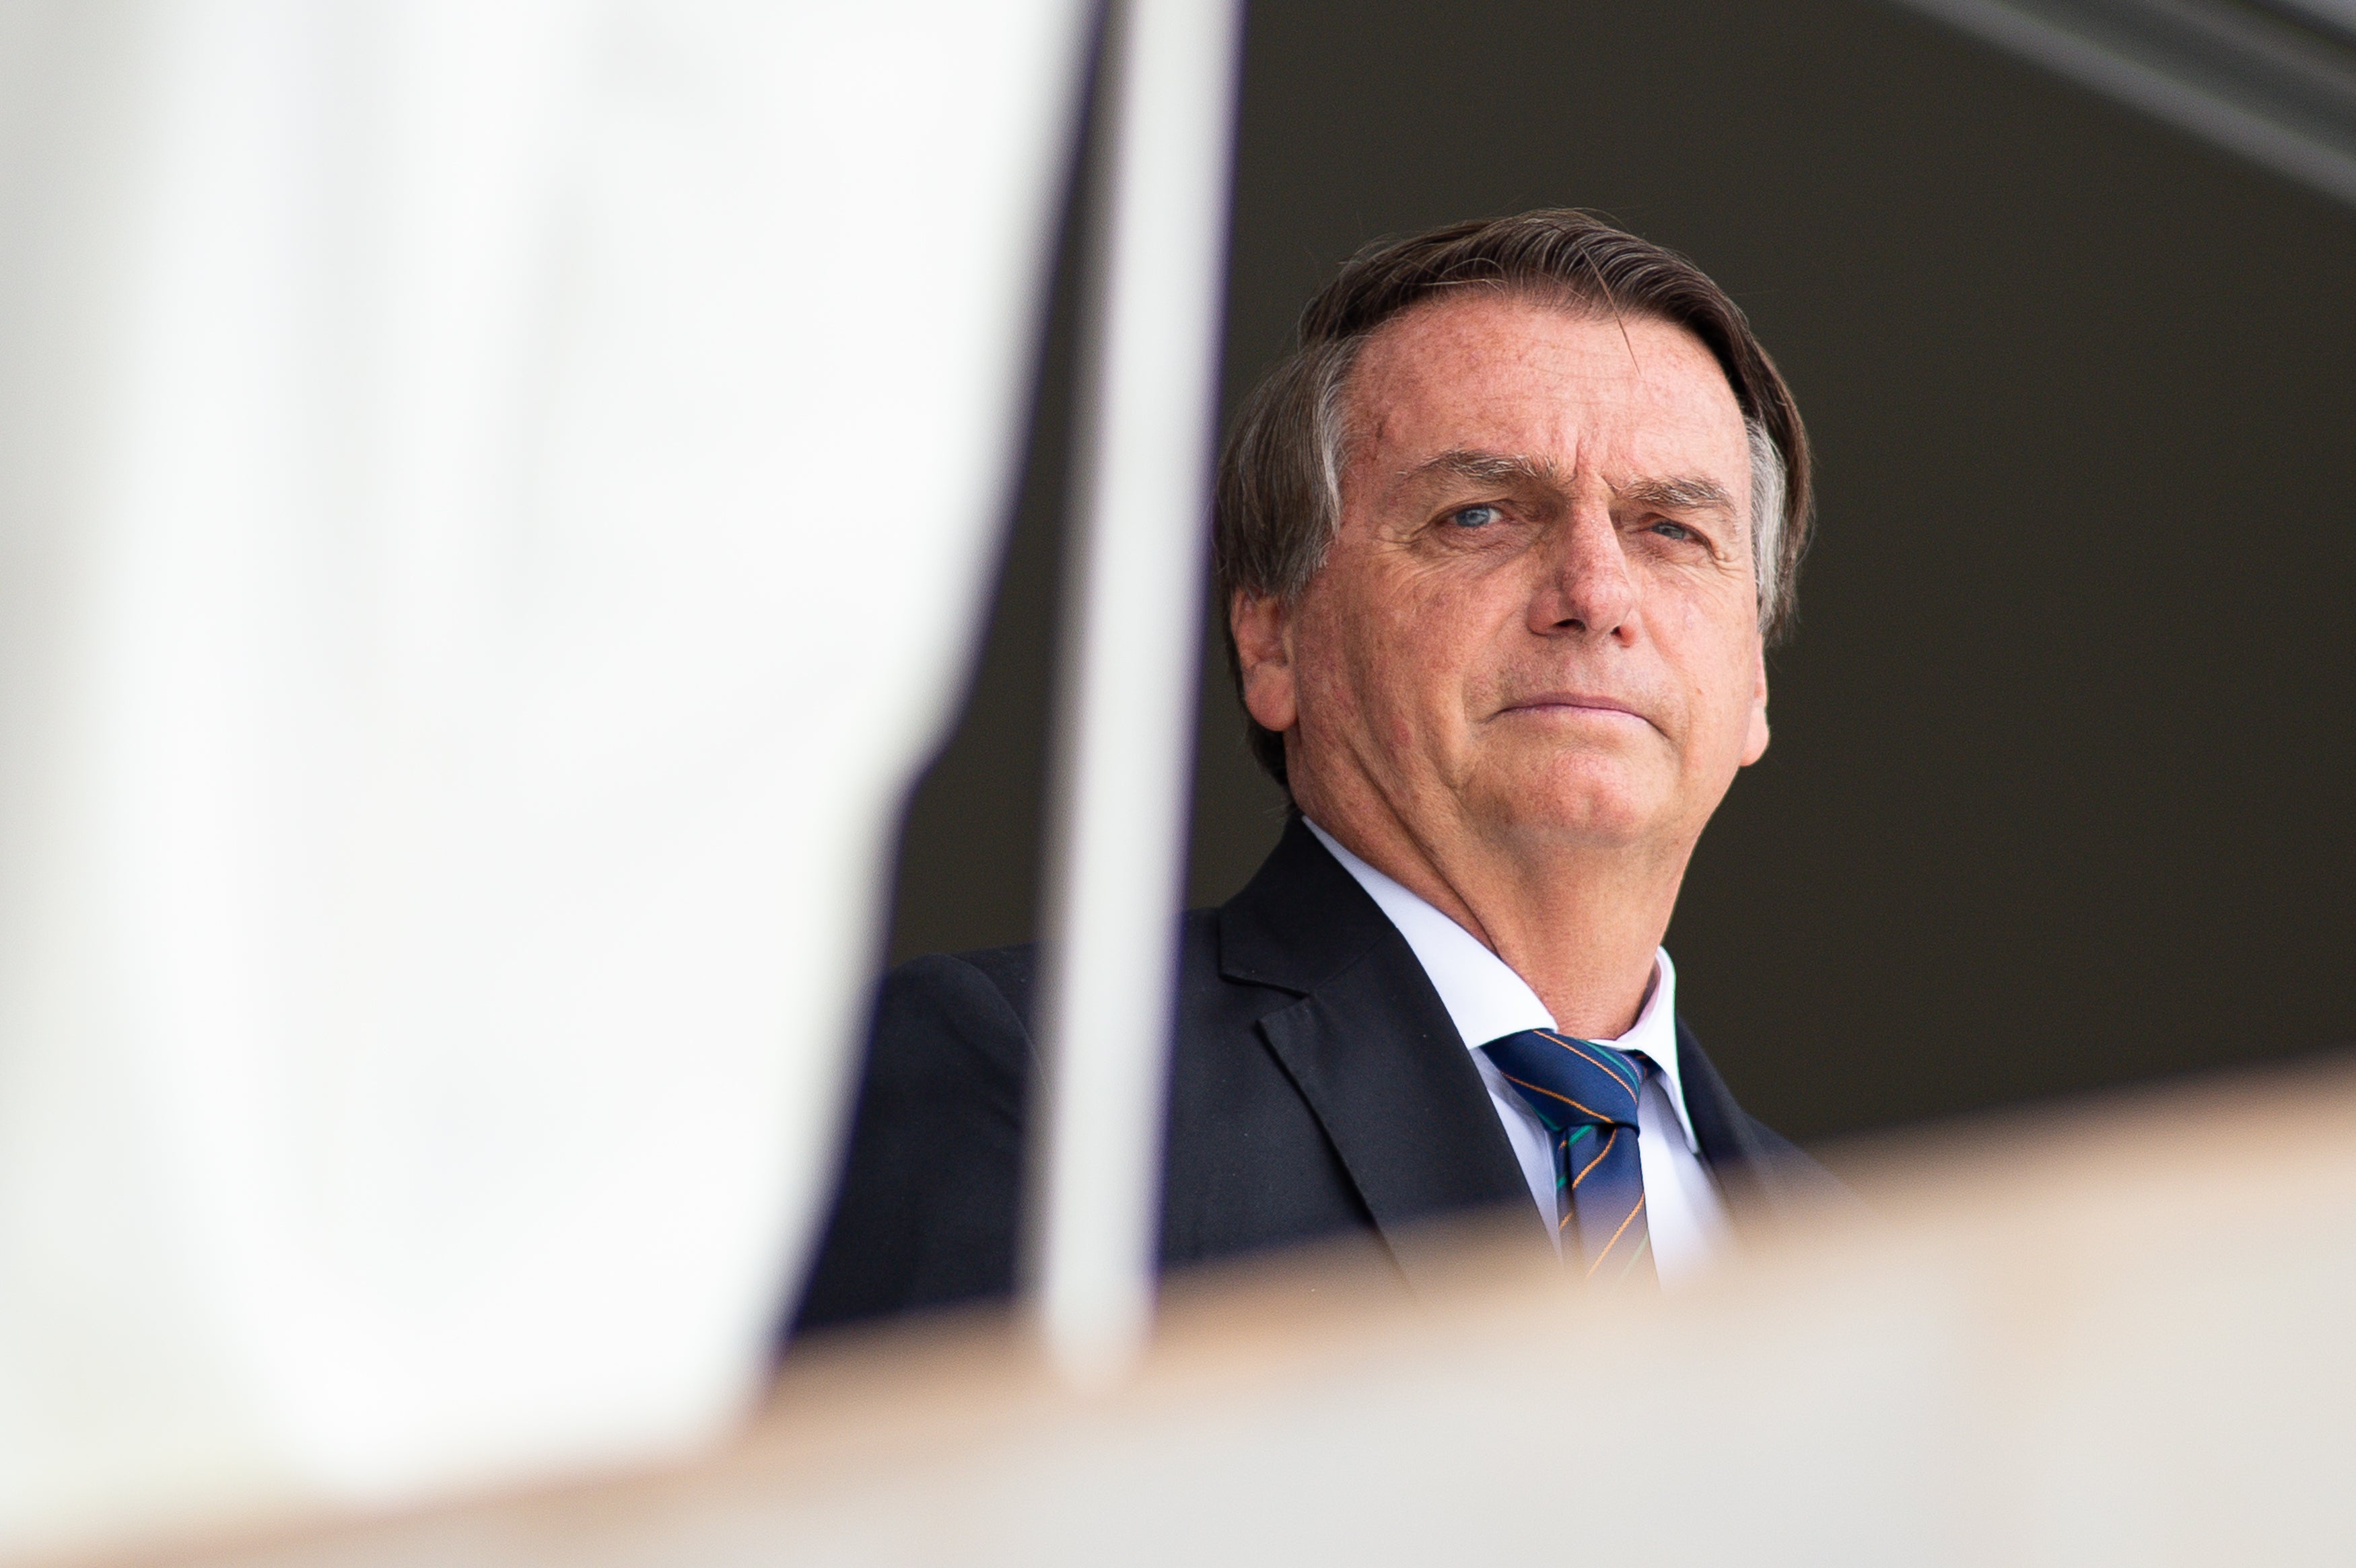 File: President of Brazil Jair Bolsonaro reacts during the exchange of the presidential guard at Planalto Palace on 16 December 2021 in Brasilia, Brazil